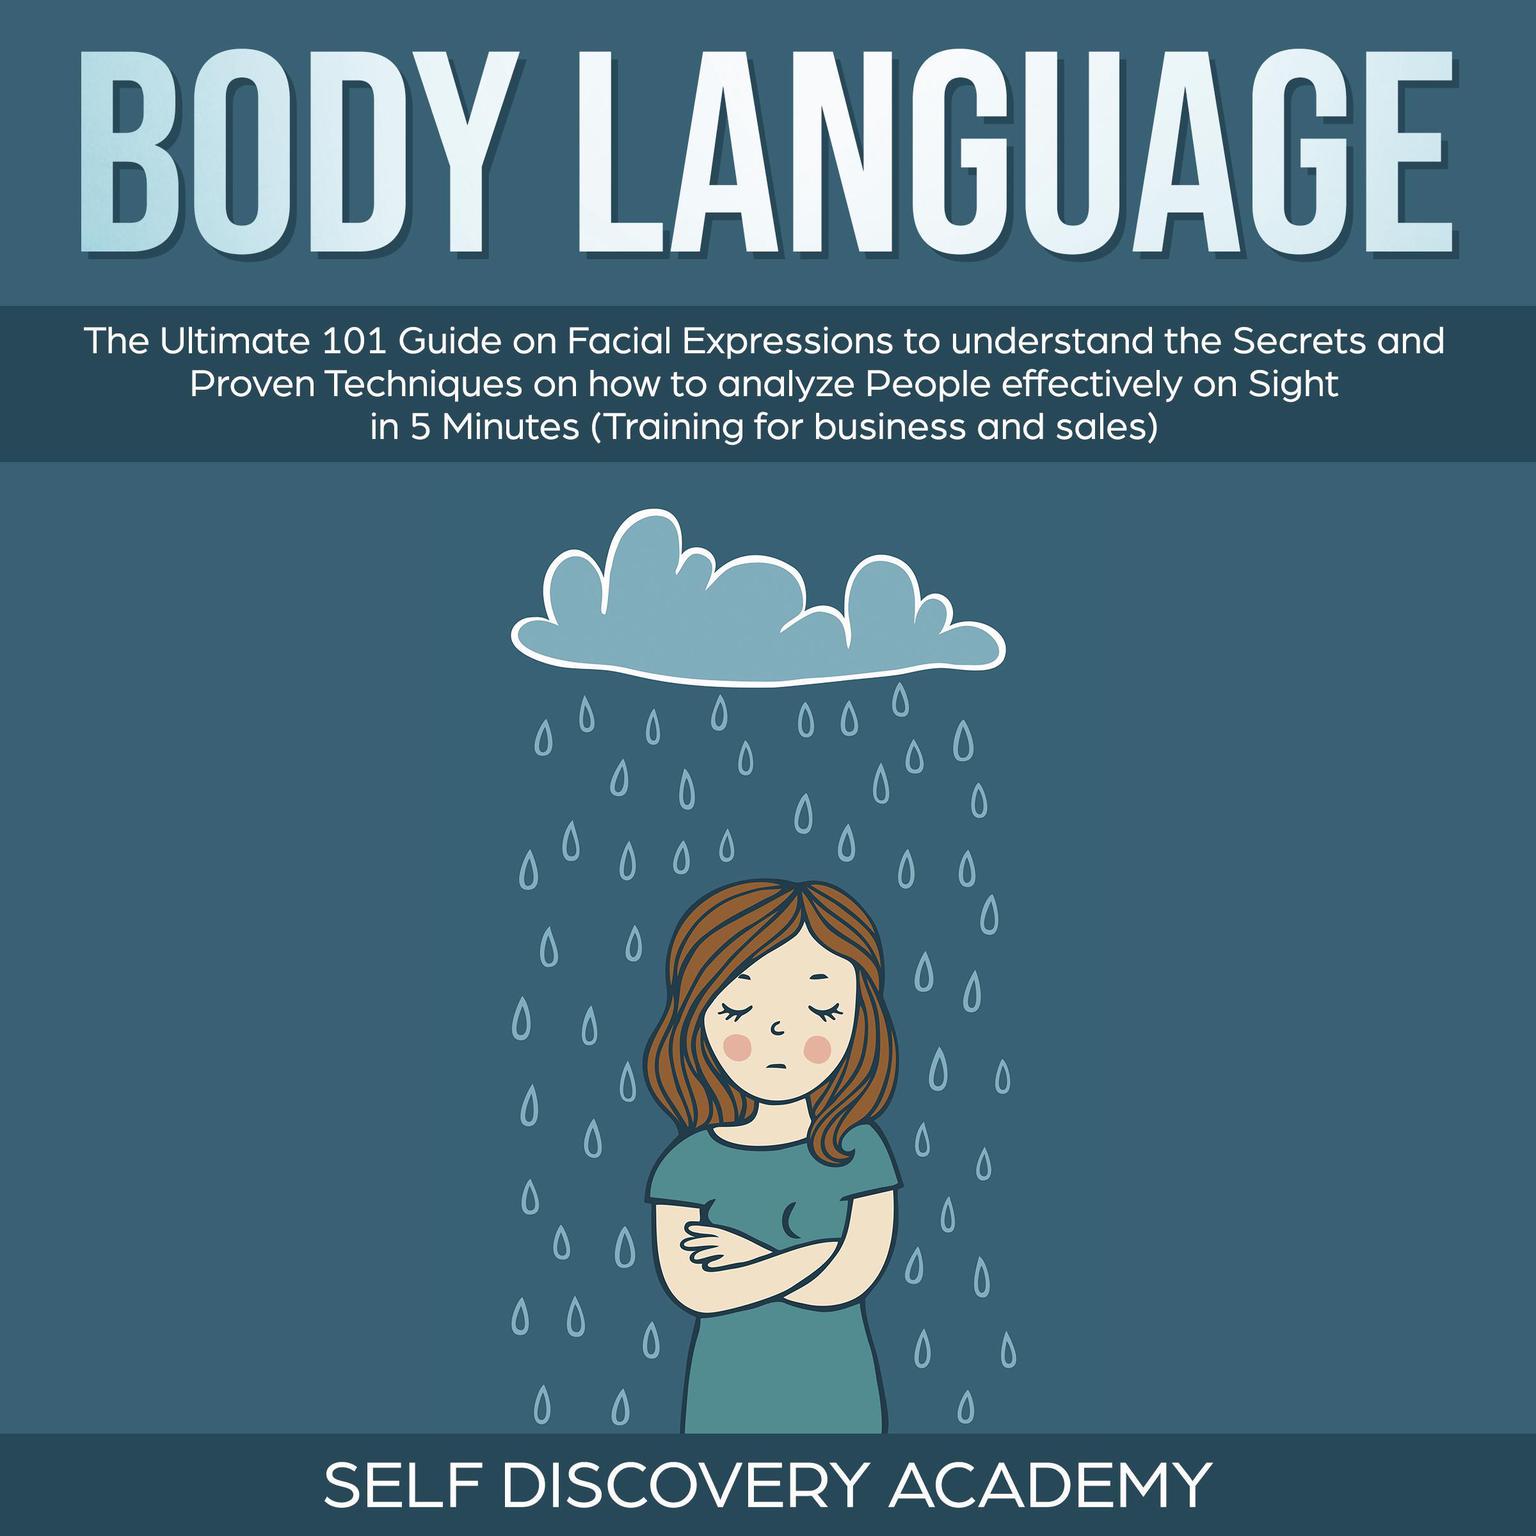 Body Language (Abridged): The Ultimate 0 Guide on Facial Expressions to understand the Secrets and Proven Techniques on how to analyze People effectively on Sight in 5 Minutes (Training for Business and Sales) Audiobook, by Self Discovery Academy